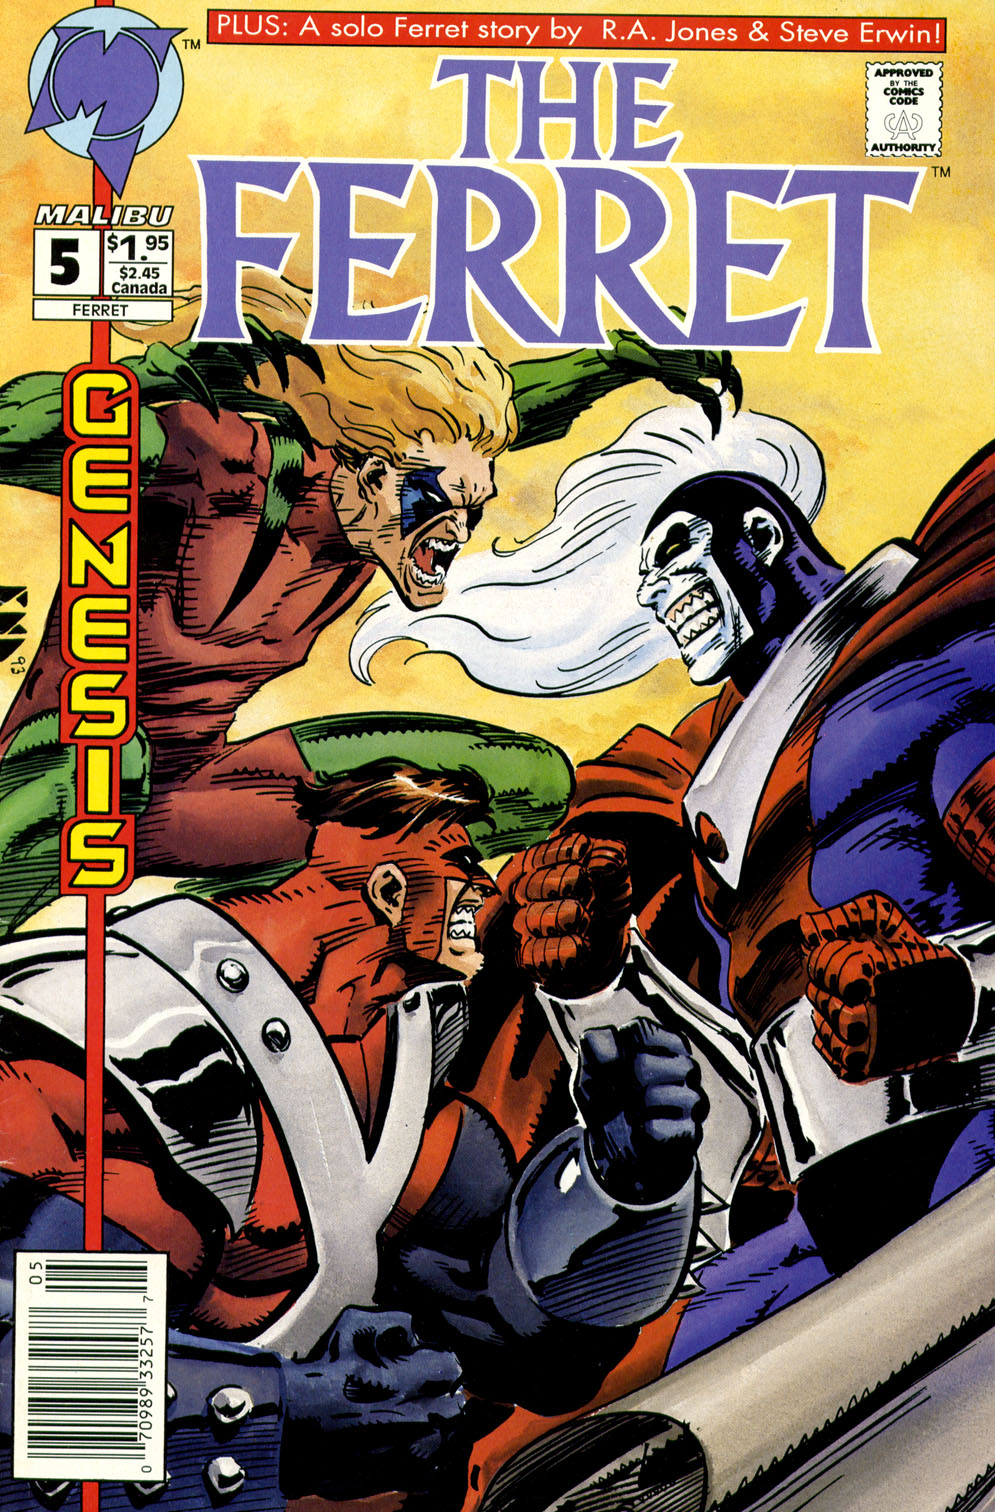 Read online The Ferret comic -  Issue #5 - 1